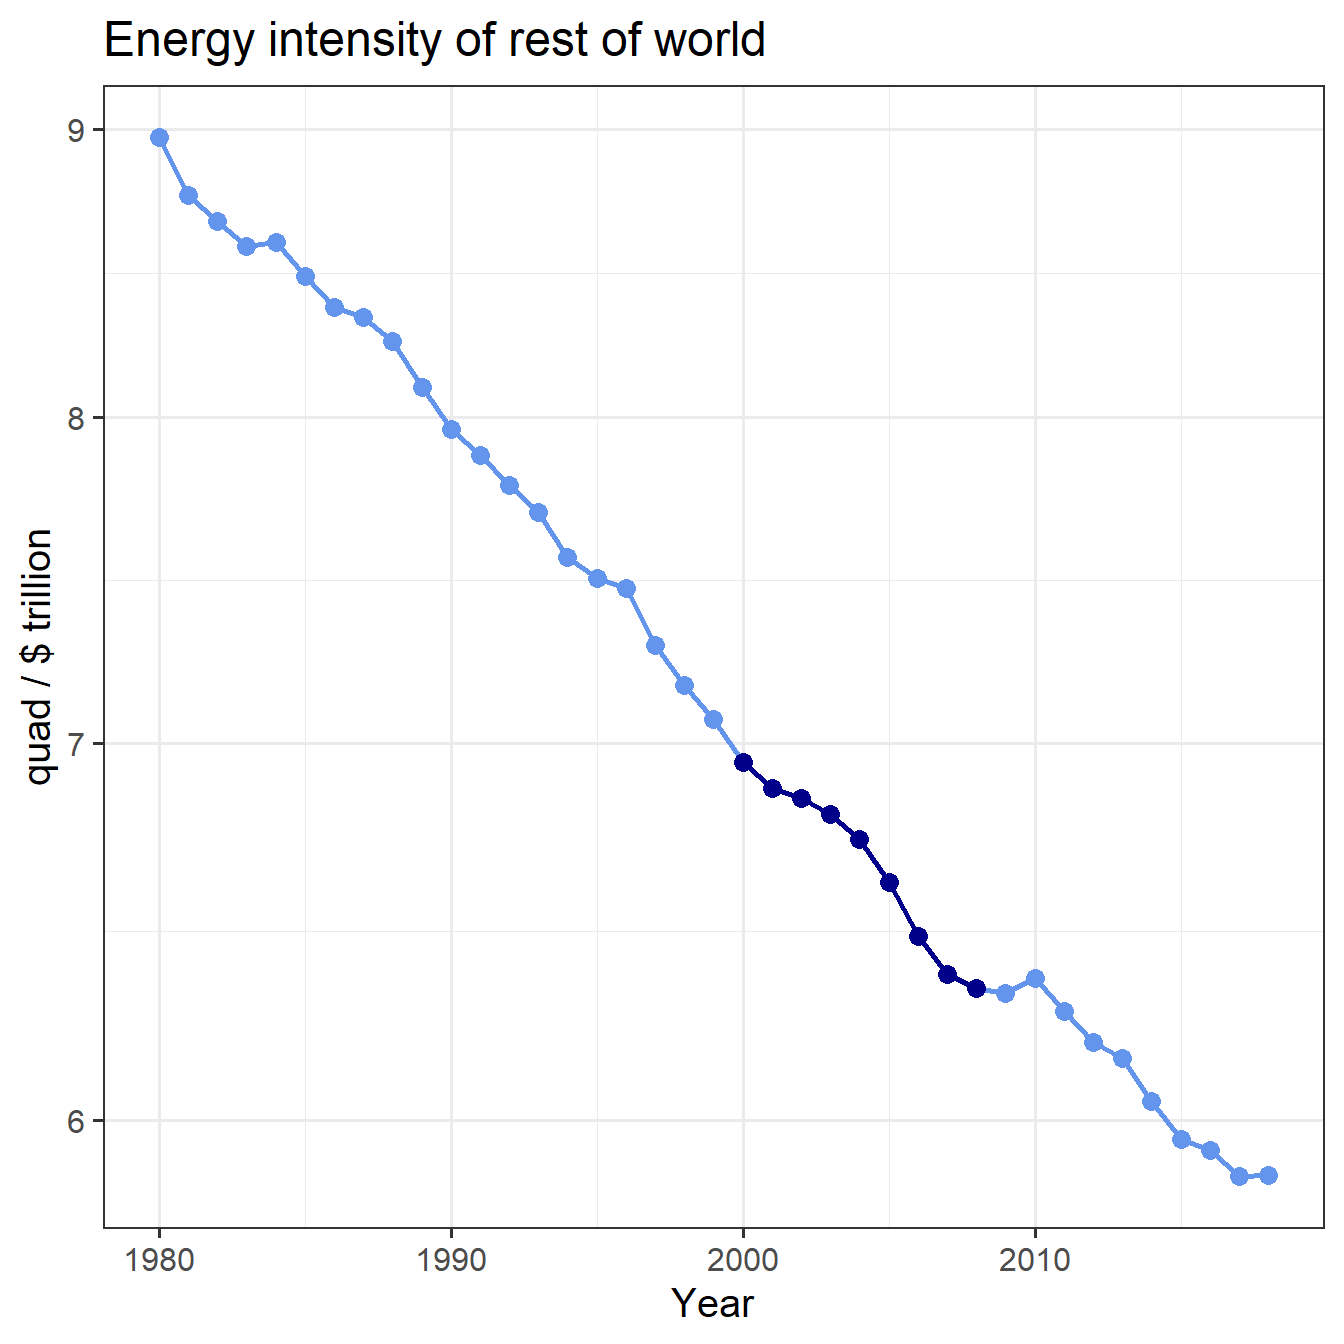 Trend of energy intensity for the world except China, with 2000--2008 highlighted.